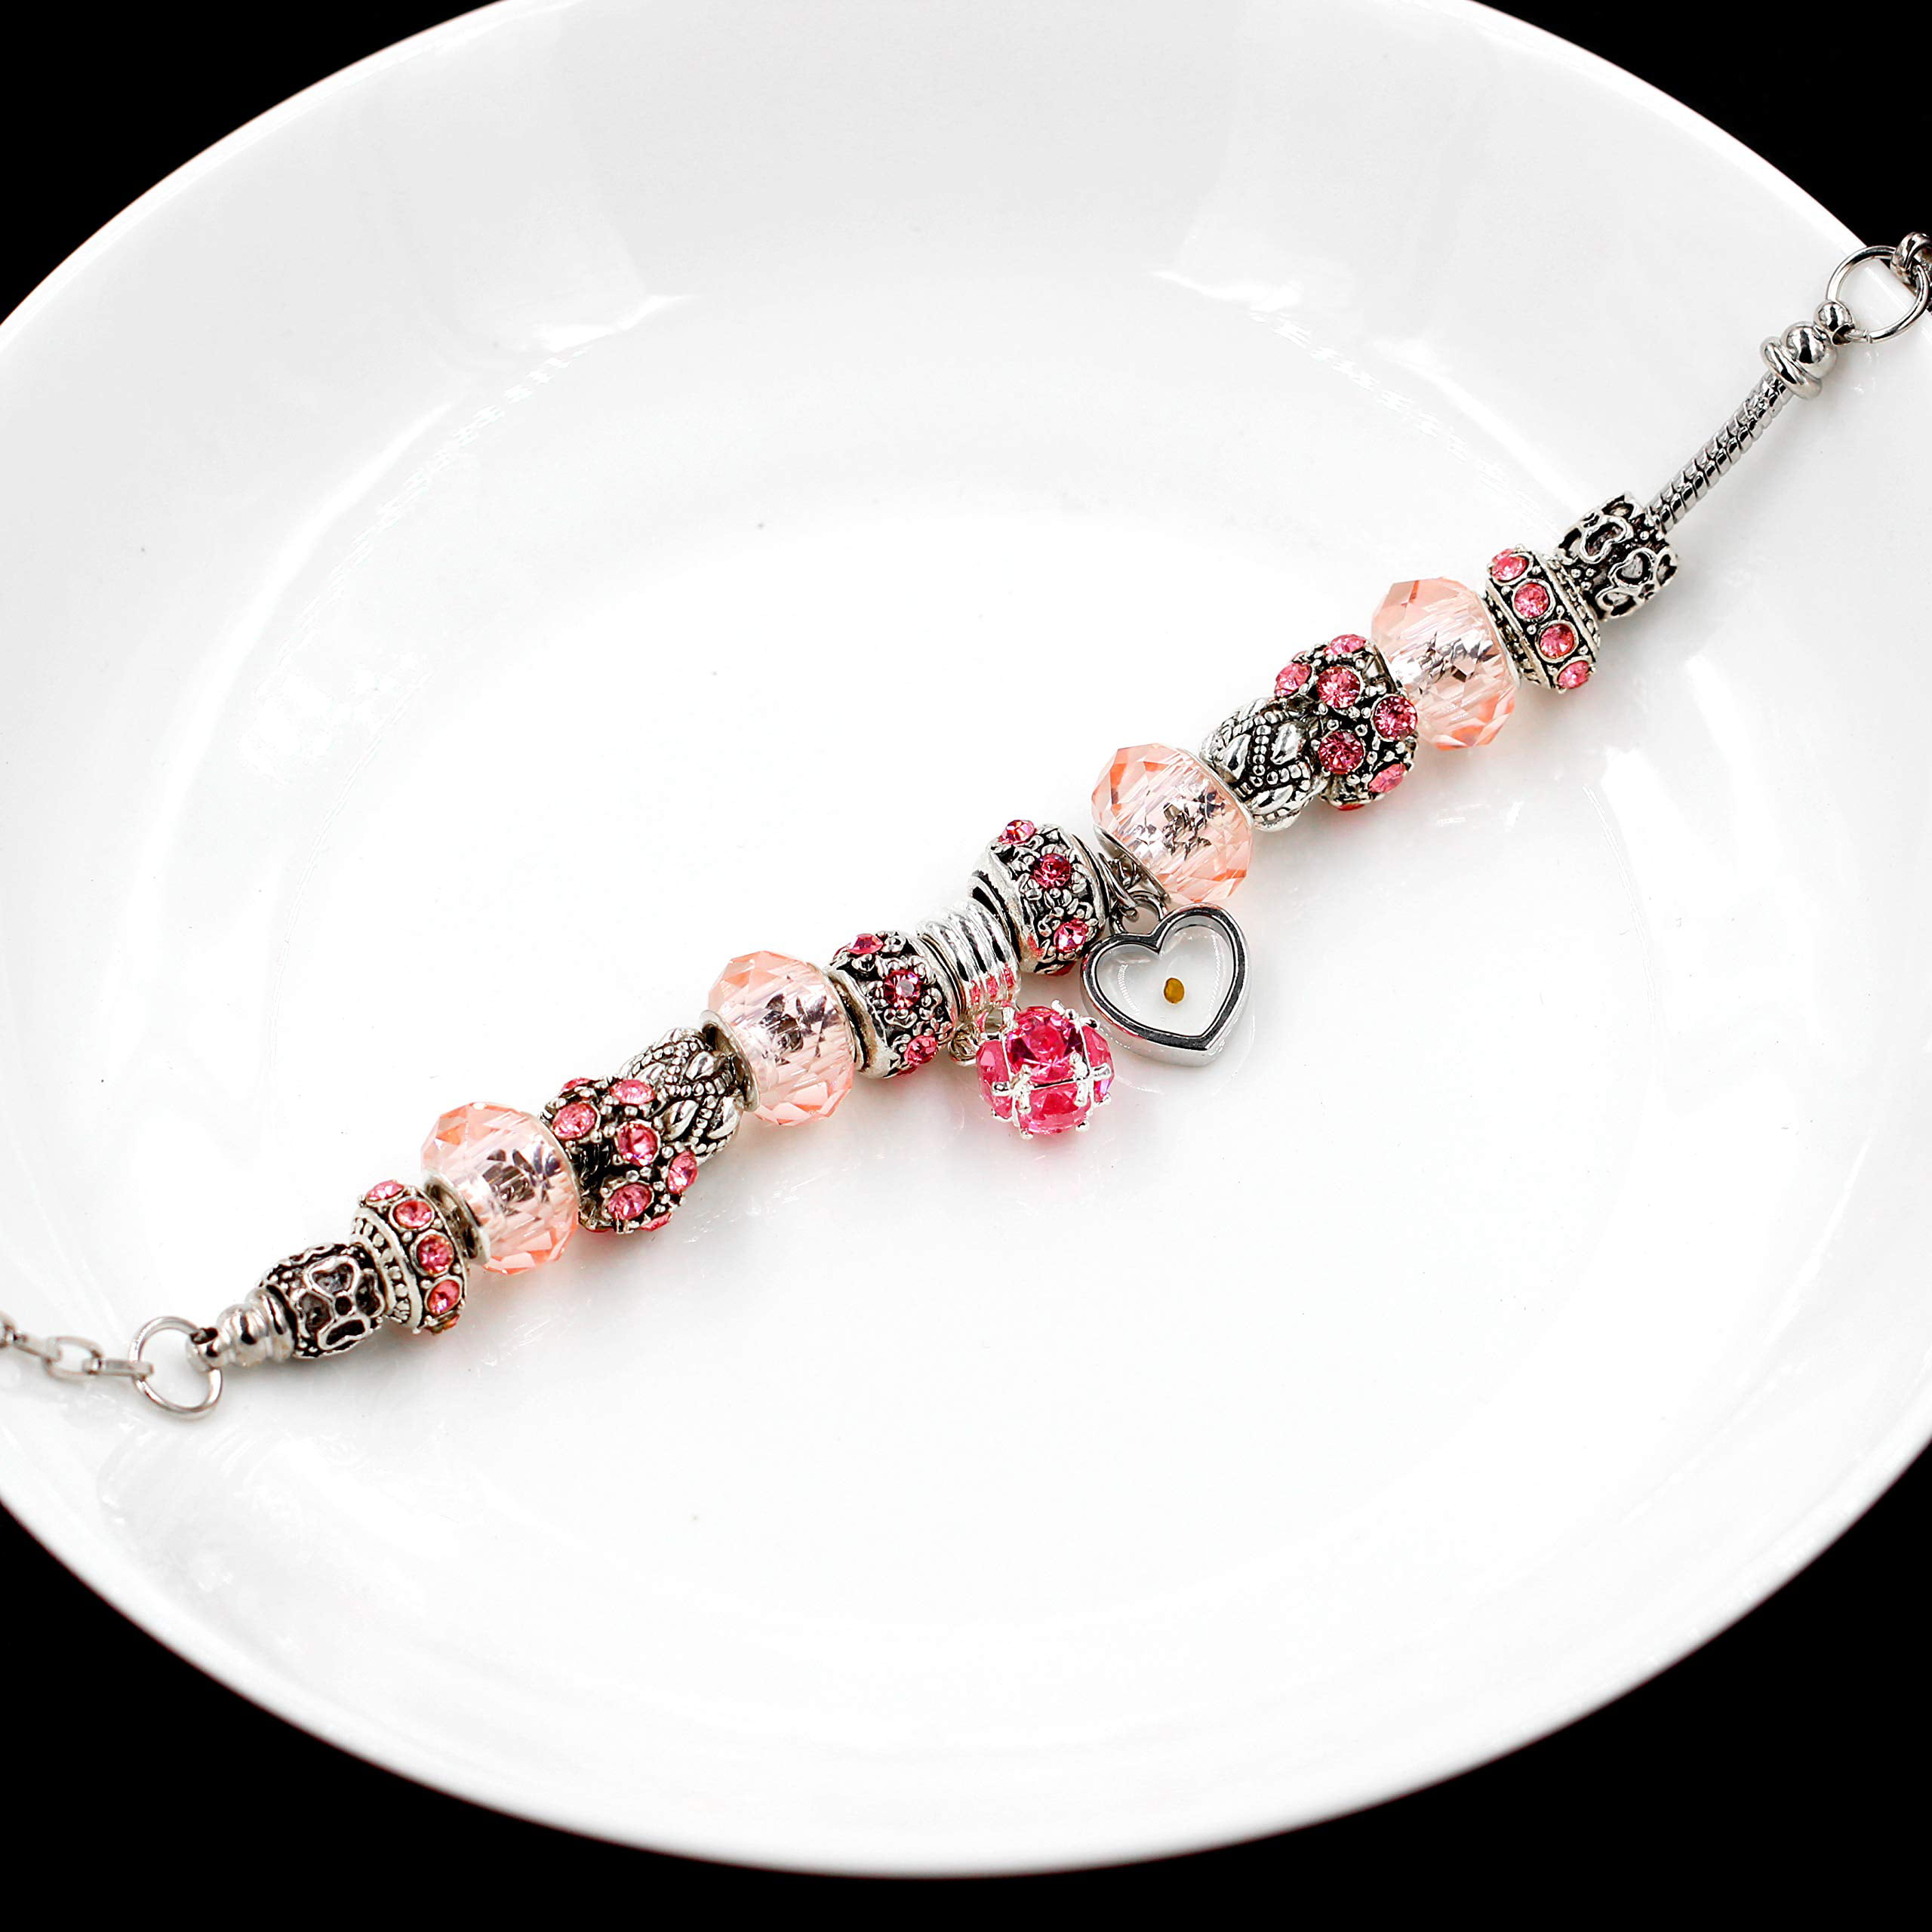 Pink Sakura Heart Bracelet With Flower Charm For Women 925 Silver Snake  Chain Charm With Original Pendant From Mgck, $22.16